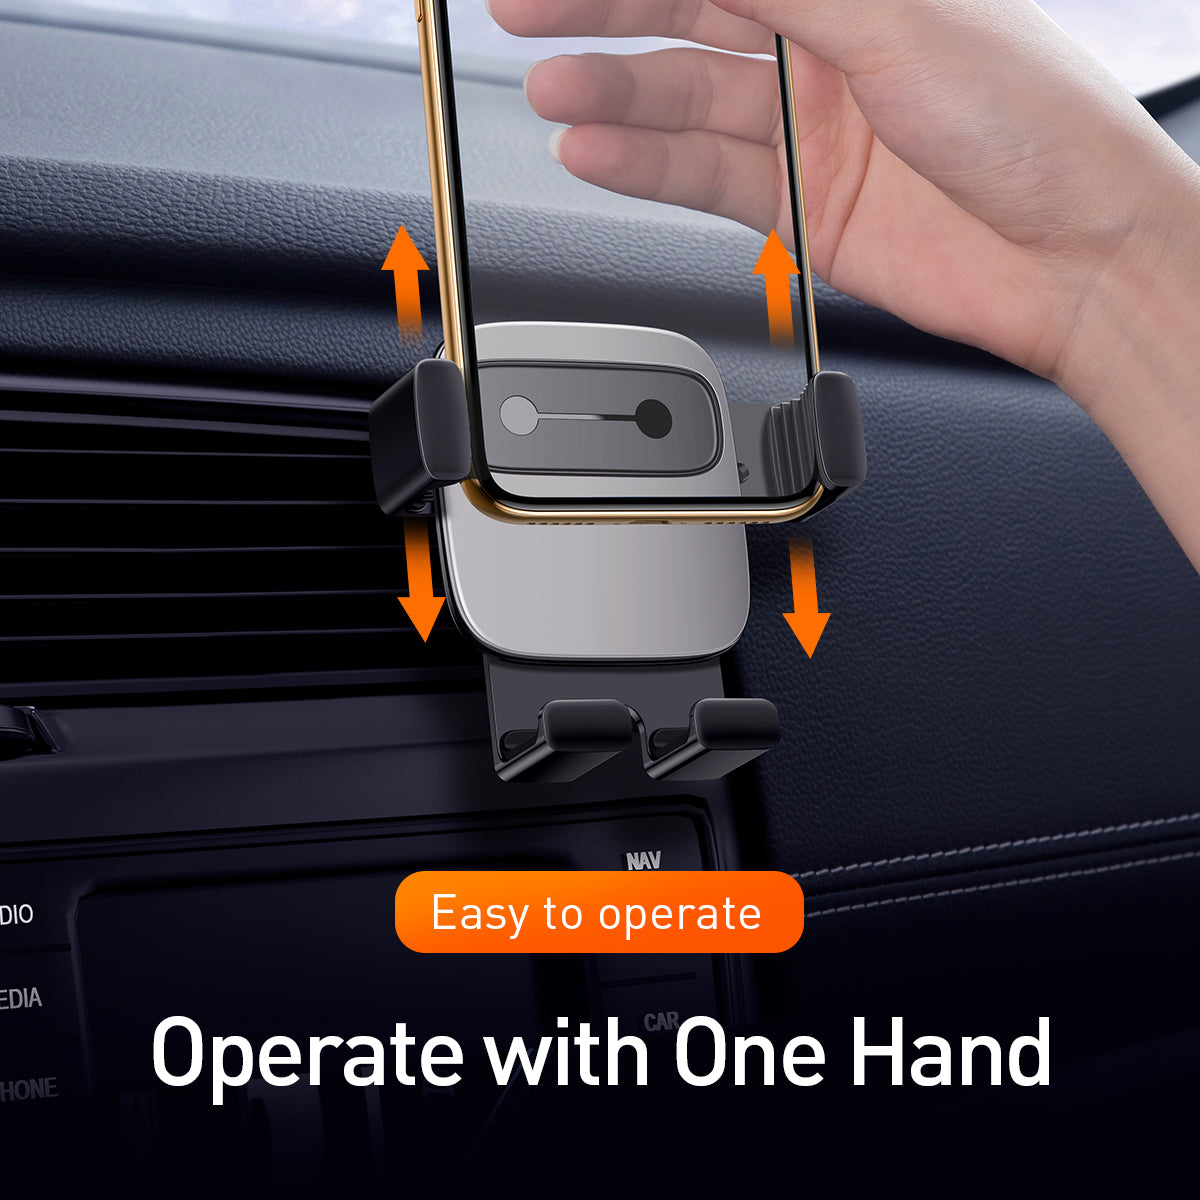 Cube Gravity Car Mount Phone Holder for Air Vents